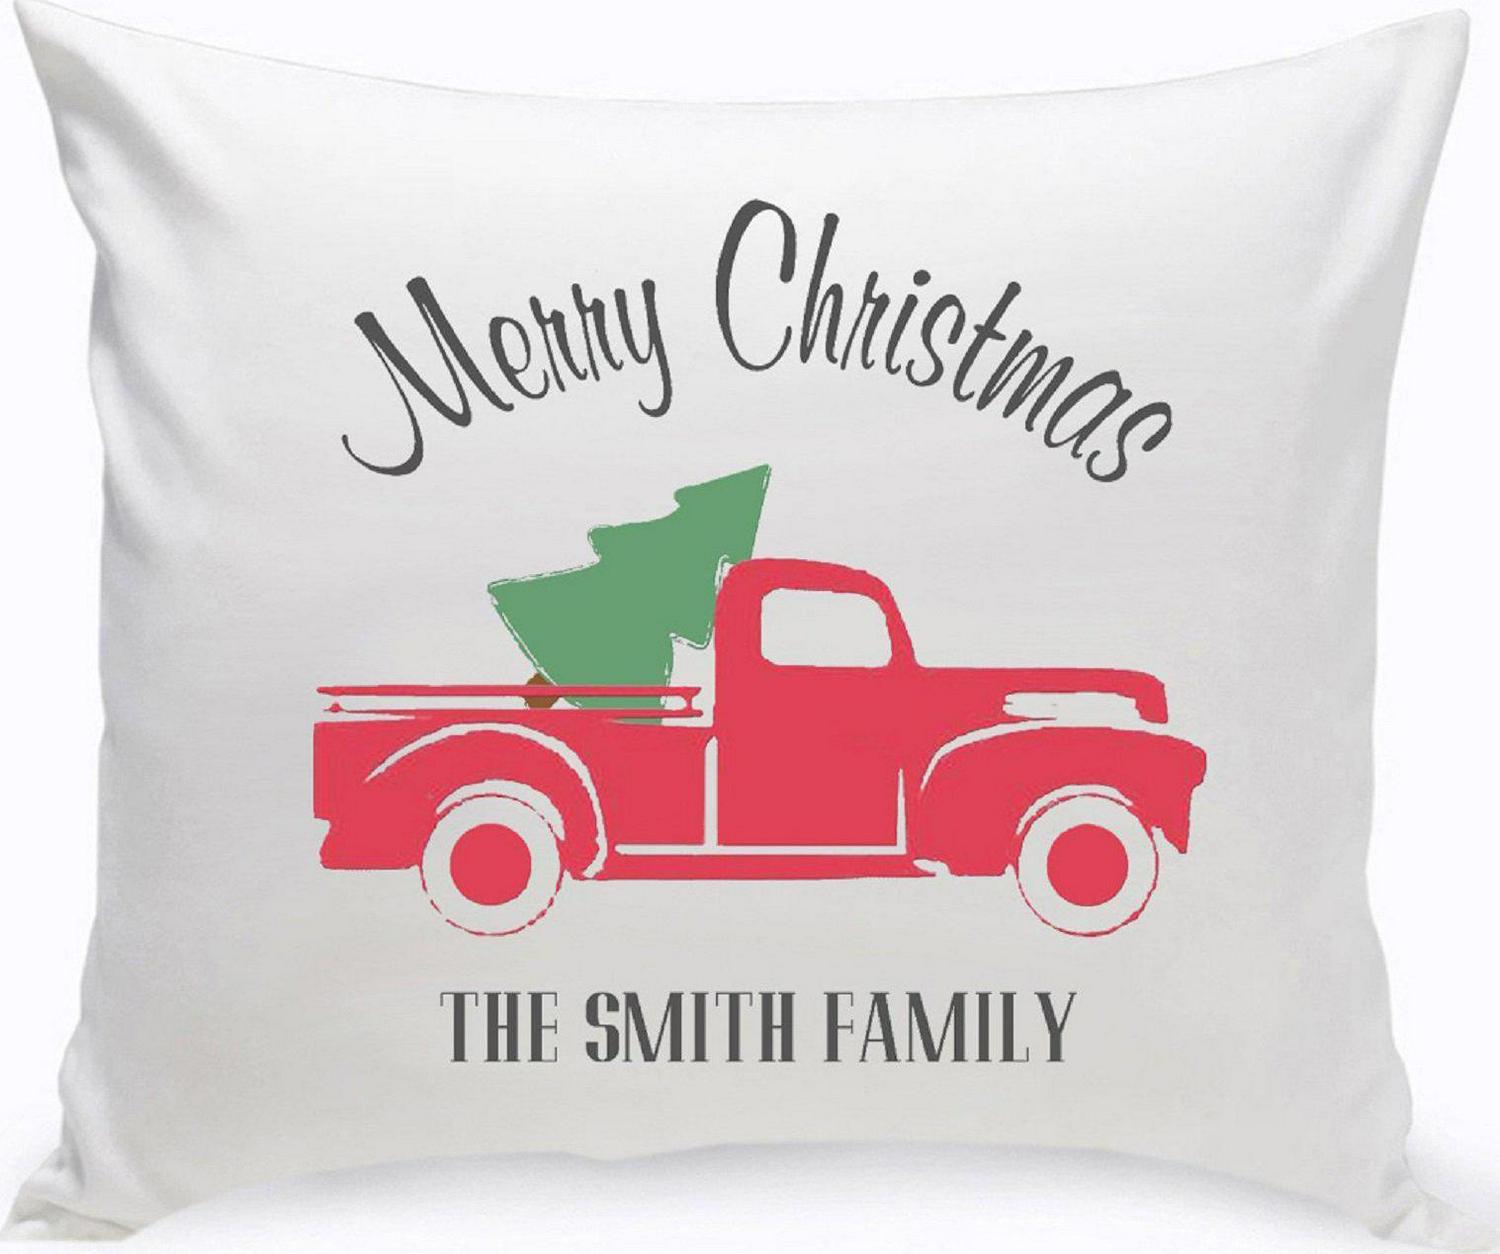 Red Christmas Truck Throw Pillow